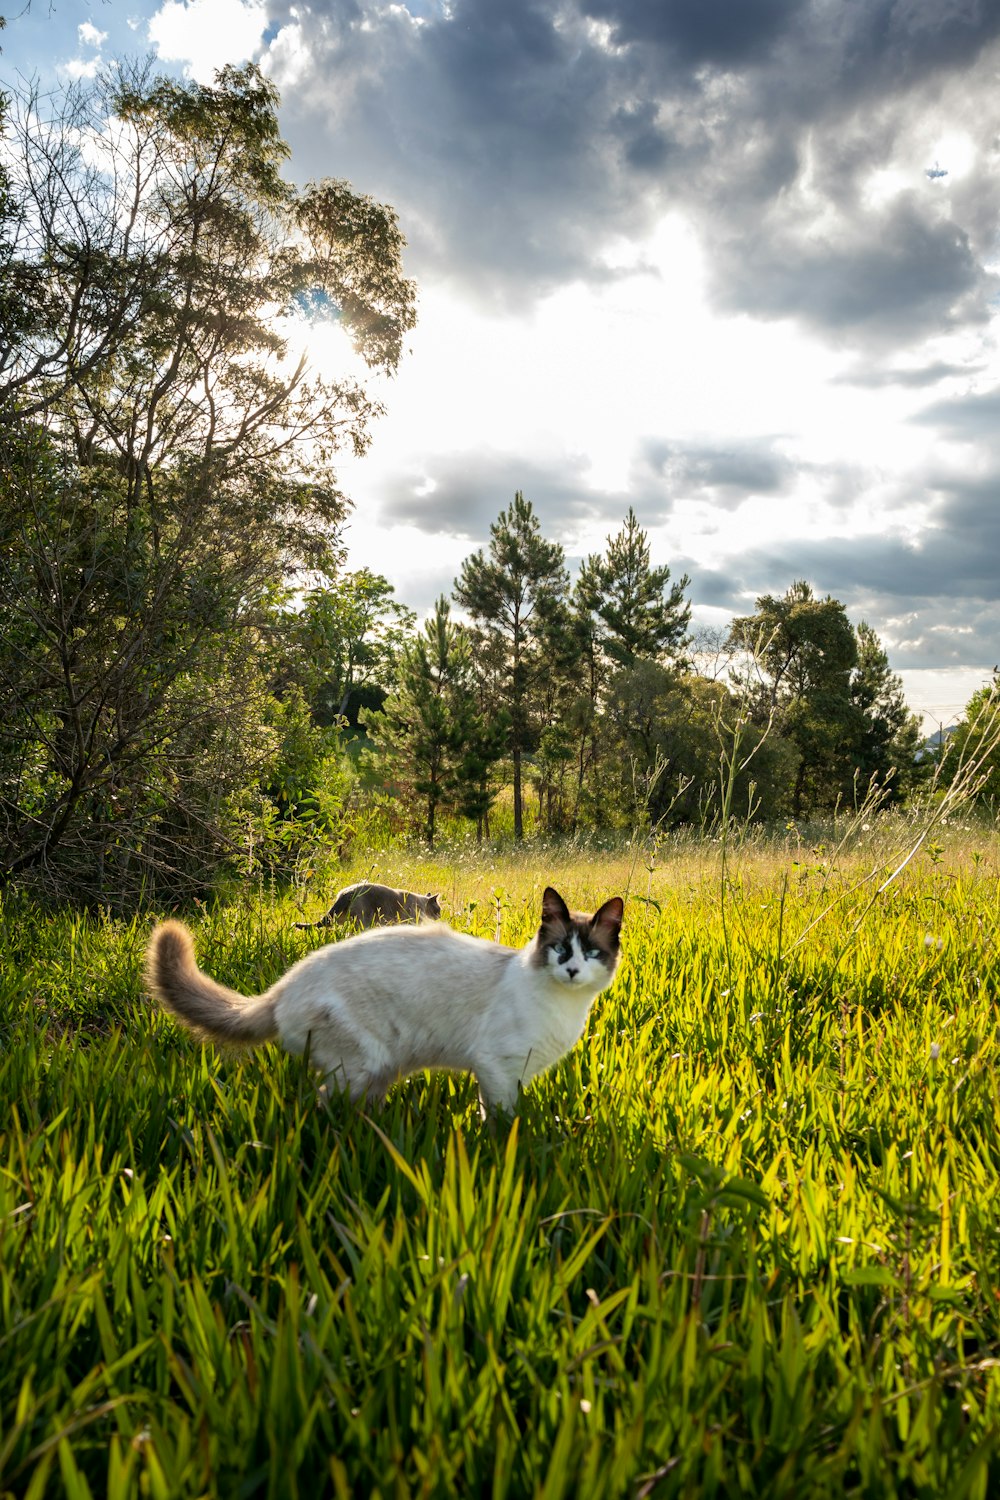 a white and black cat walking in a grassy field